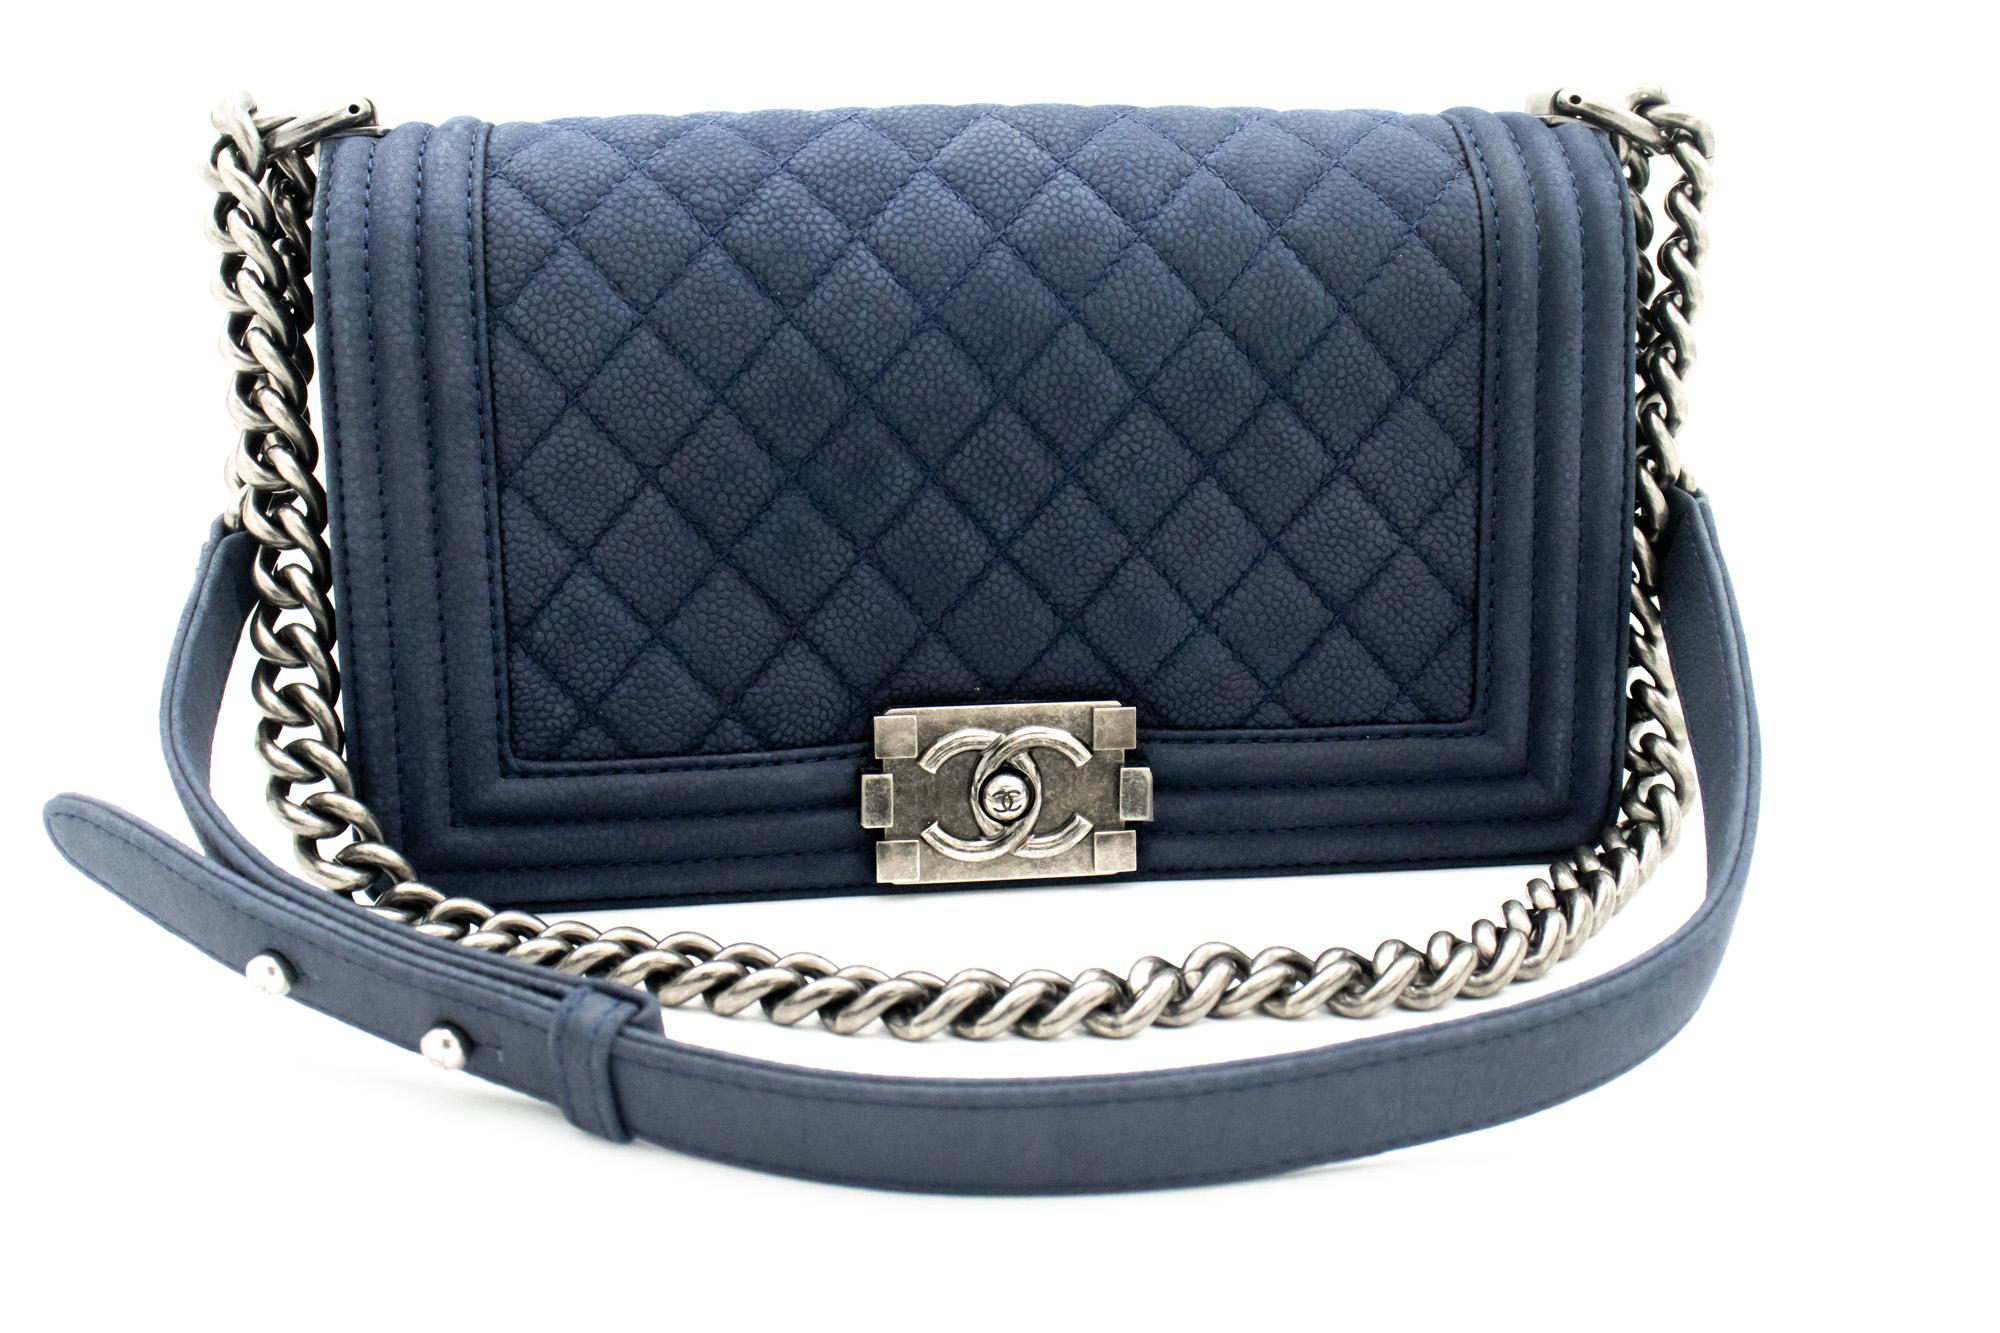 An authentic CHANEL Boy Chain Shoulder Bag Navy Quilted Flap Caviar Grained. The color is Navy. The outside material is Leather. The pattern is Solid. This item is Contemporary. The year of manufacture would be 2013.
Conditions & Ratings
Outside